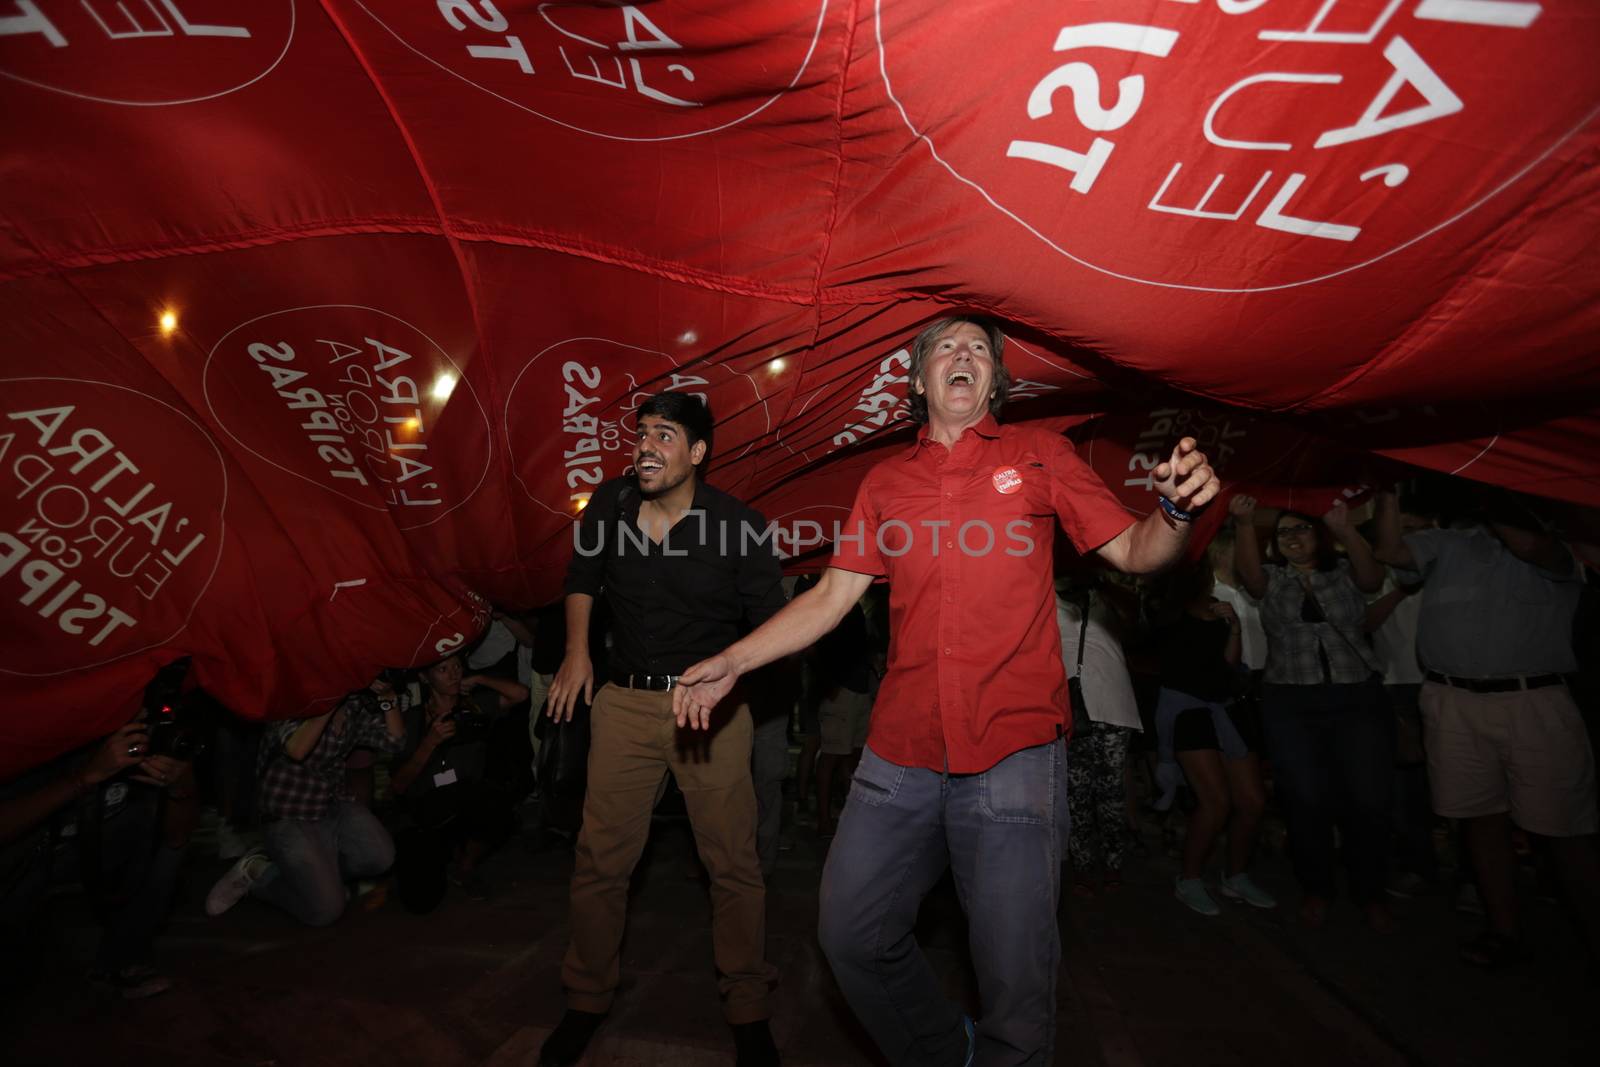 GREECE, Athens: Syriza supporters celebrate with a large flag from the 'L'Altra Europa con Tsipras' Italian party as Syriza leader Alexis Tsipras addressed supporters in Athens after claiming victory in Greece's parliamentary election on September 20, 2015.